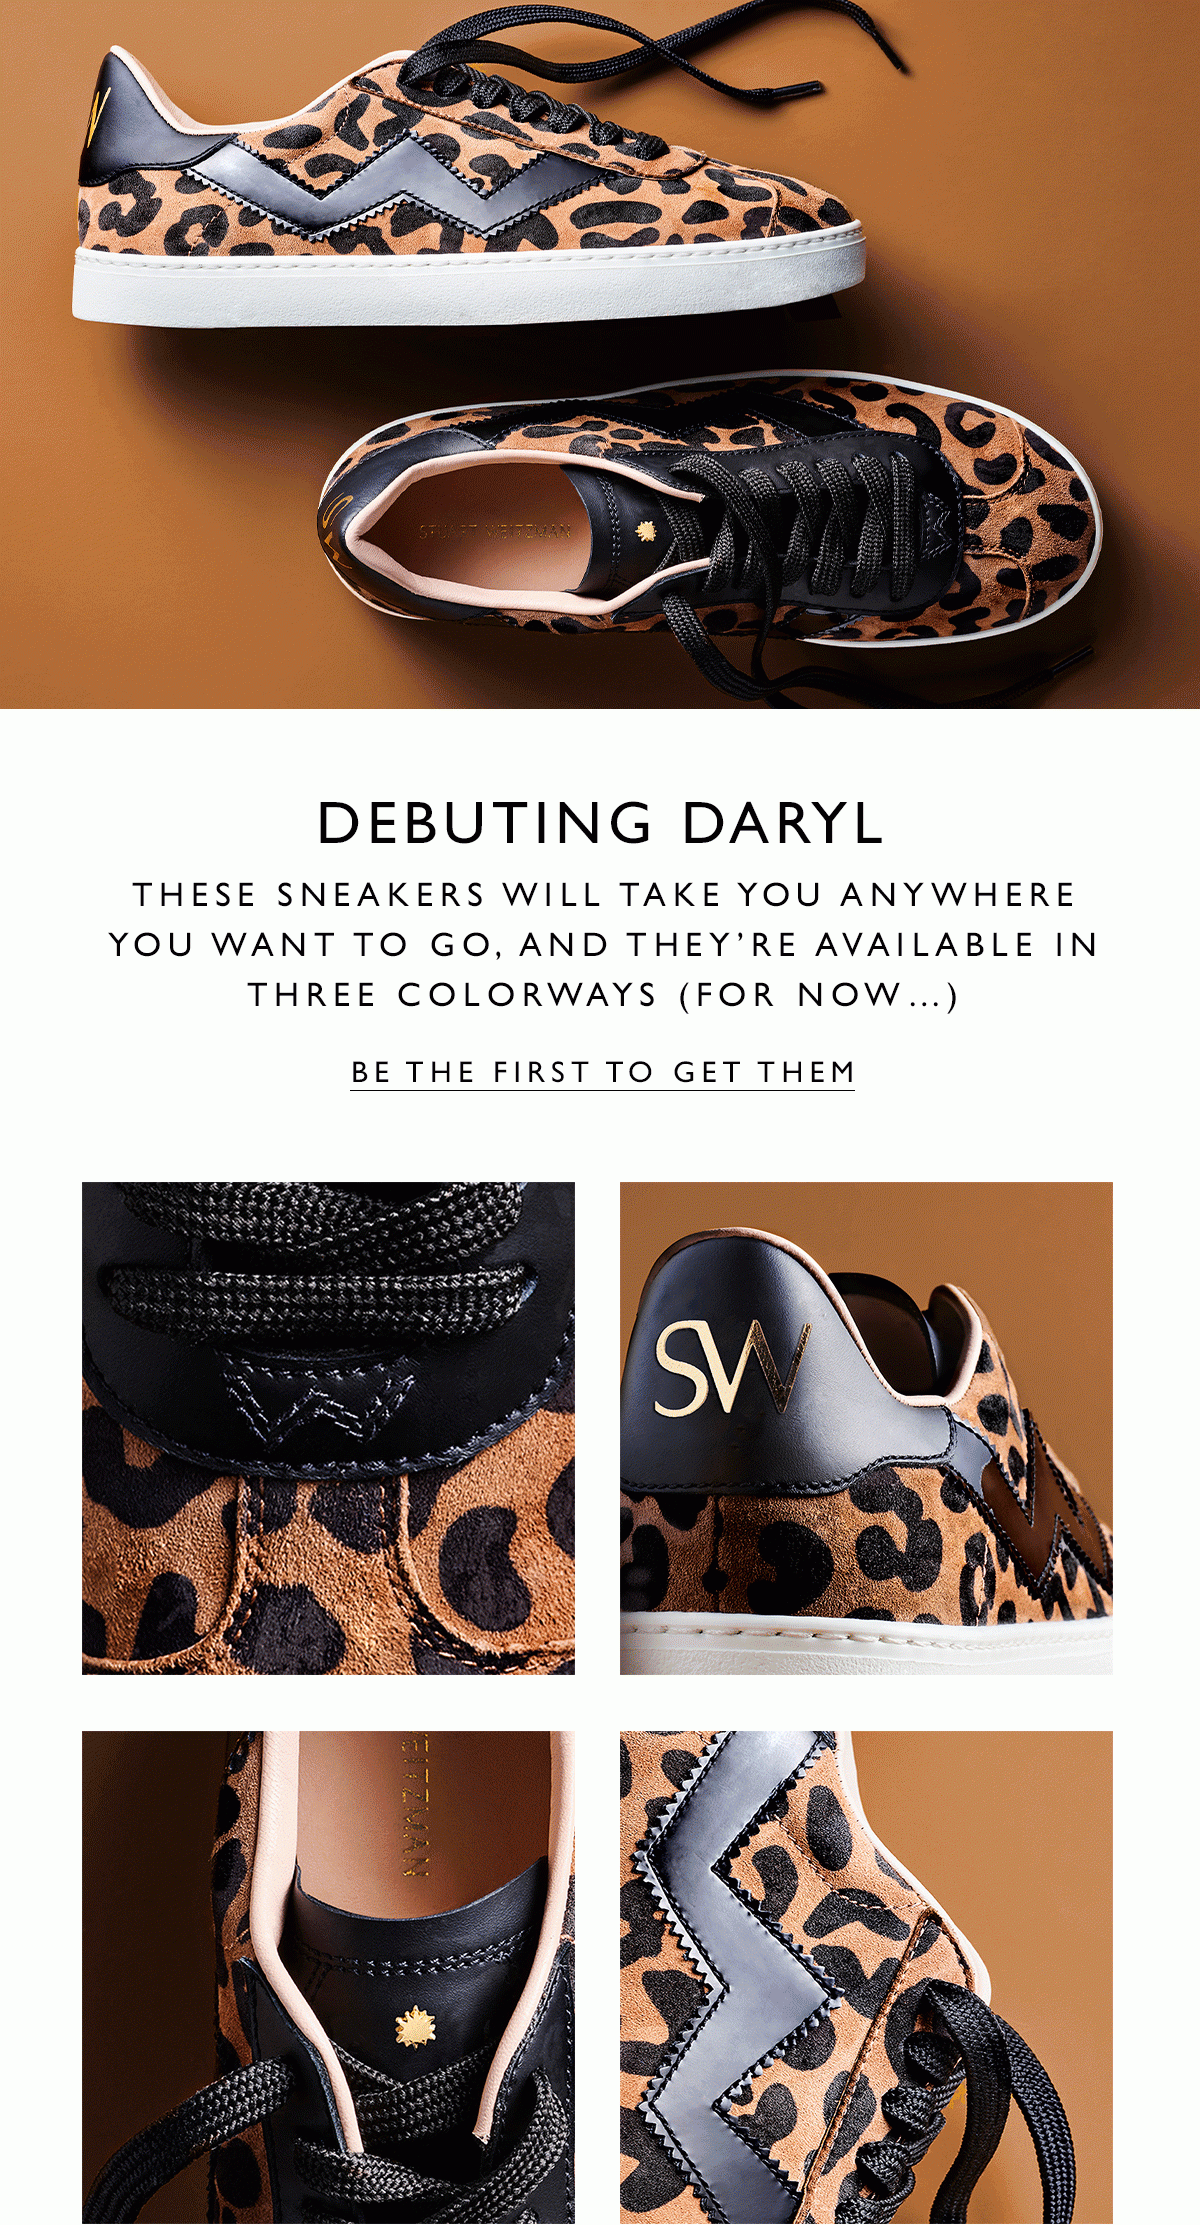 Debuting Daryl. These sneakers will take you anywhere you want to go, and they're available in three colorways (for now...) BE THE FIRST TO GET THEM.